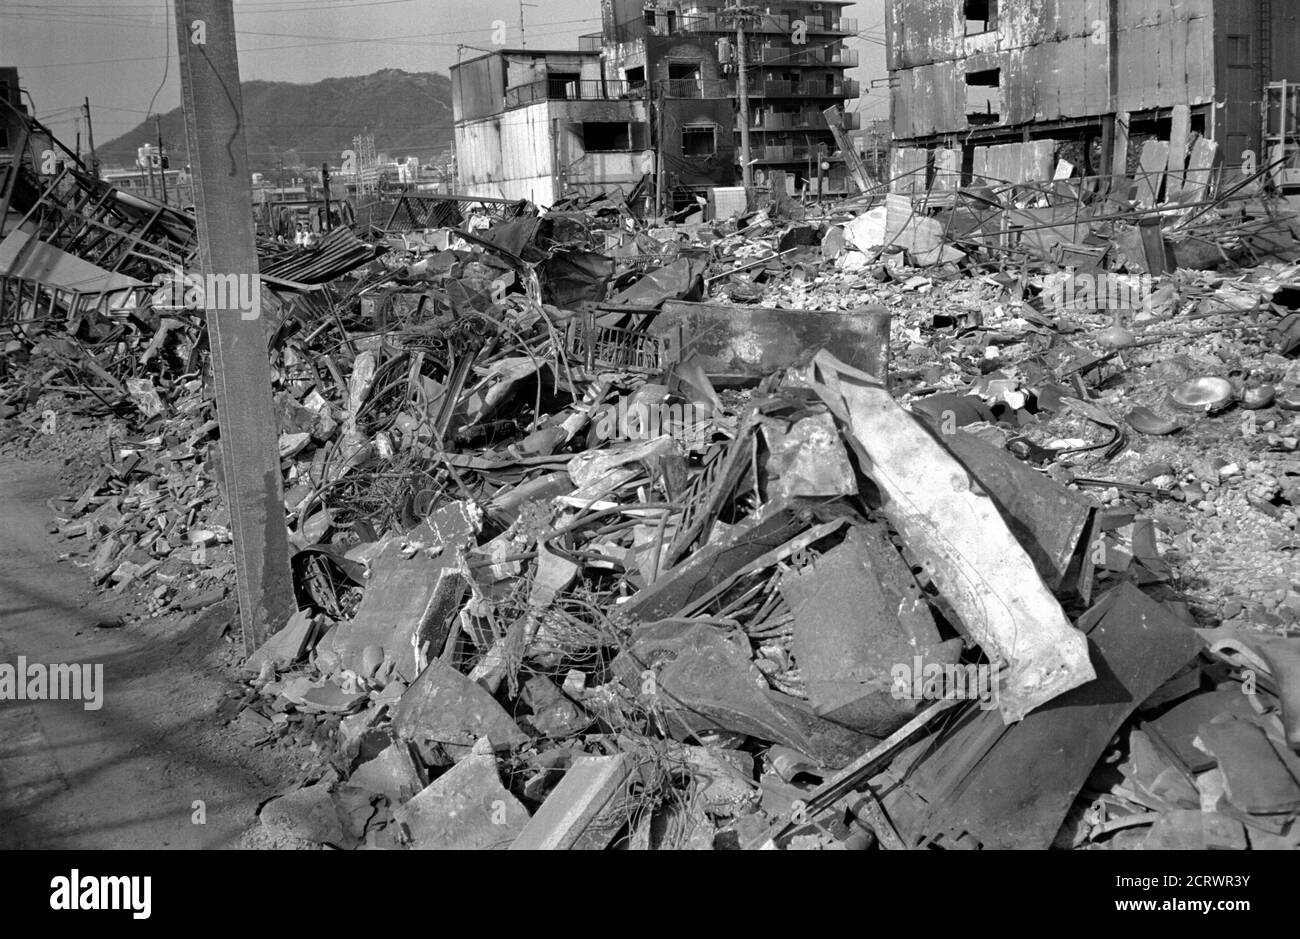 Scene of the wreckage and ruins remaining from the damage caused by the 1995 Great Hanshin Earthquake in Kobe, Japan Stock Photo